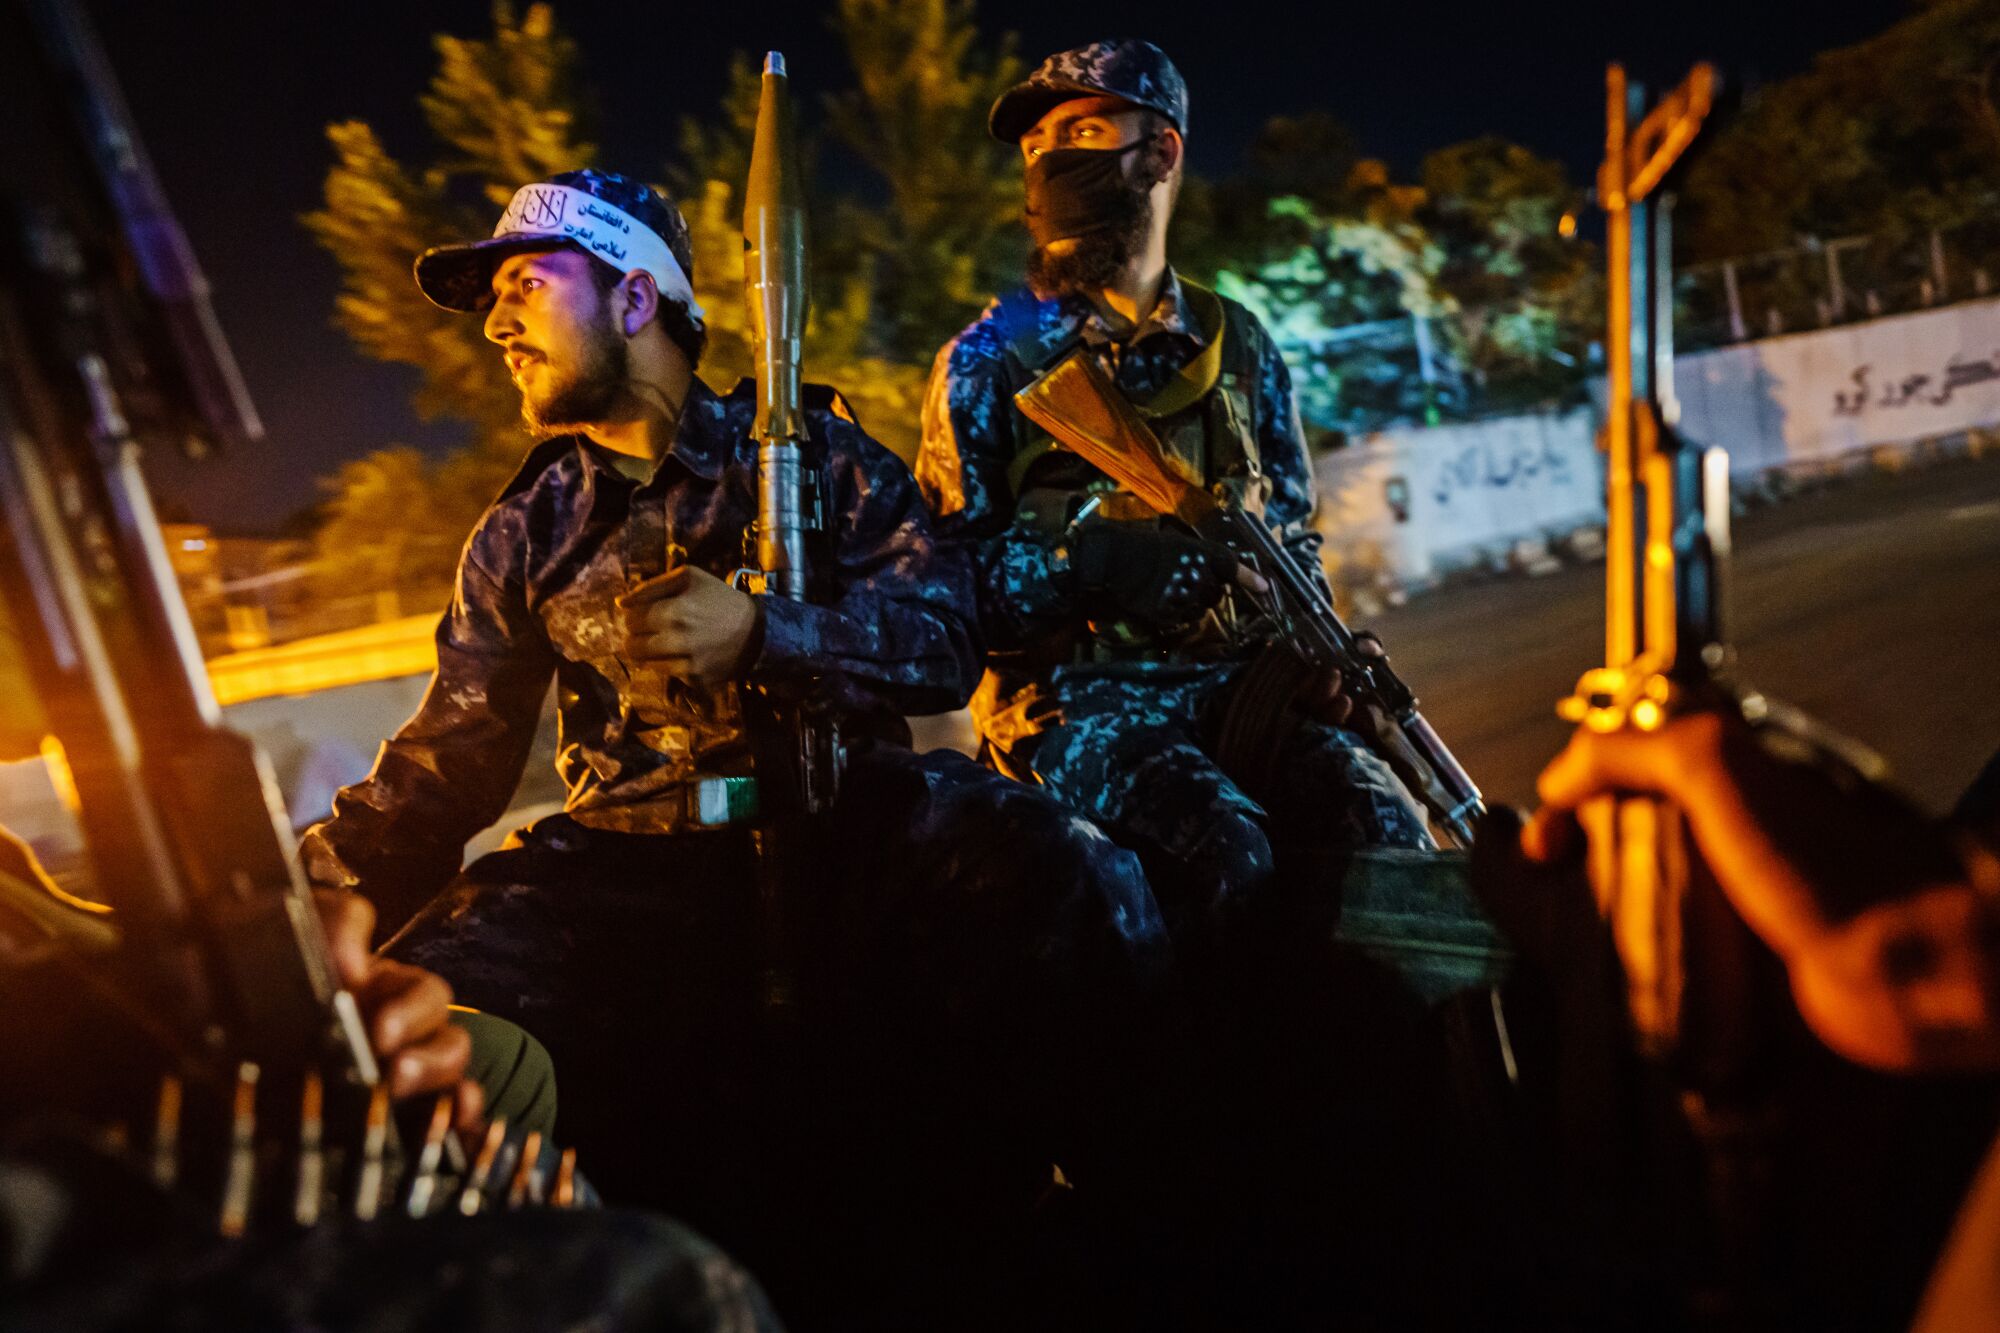 Men with rifles ride in a vehicle at night